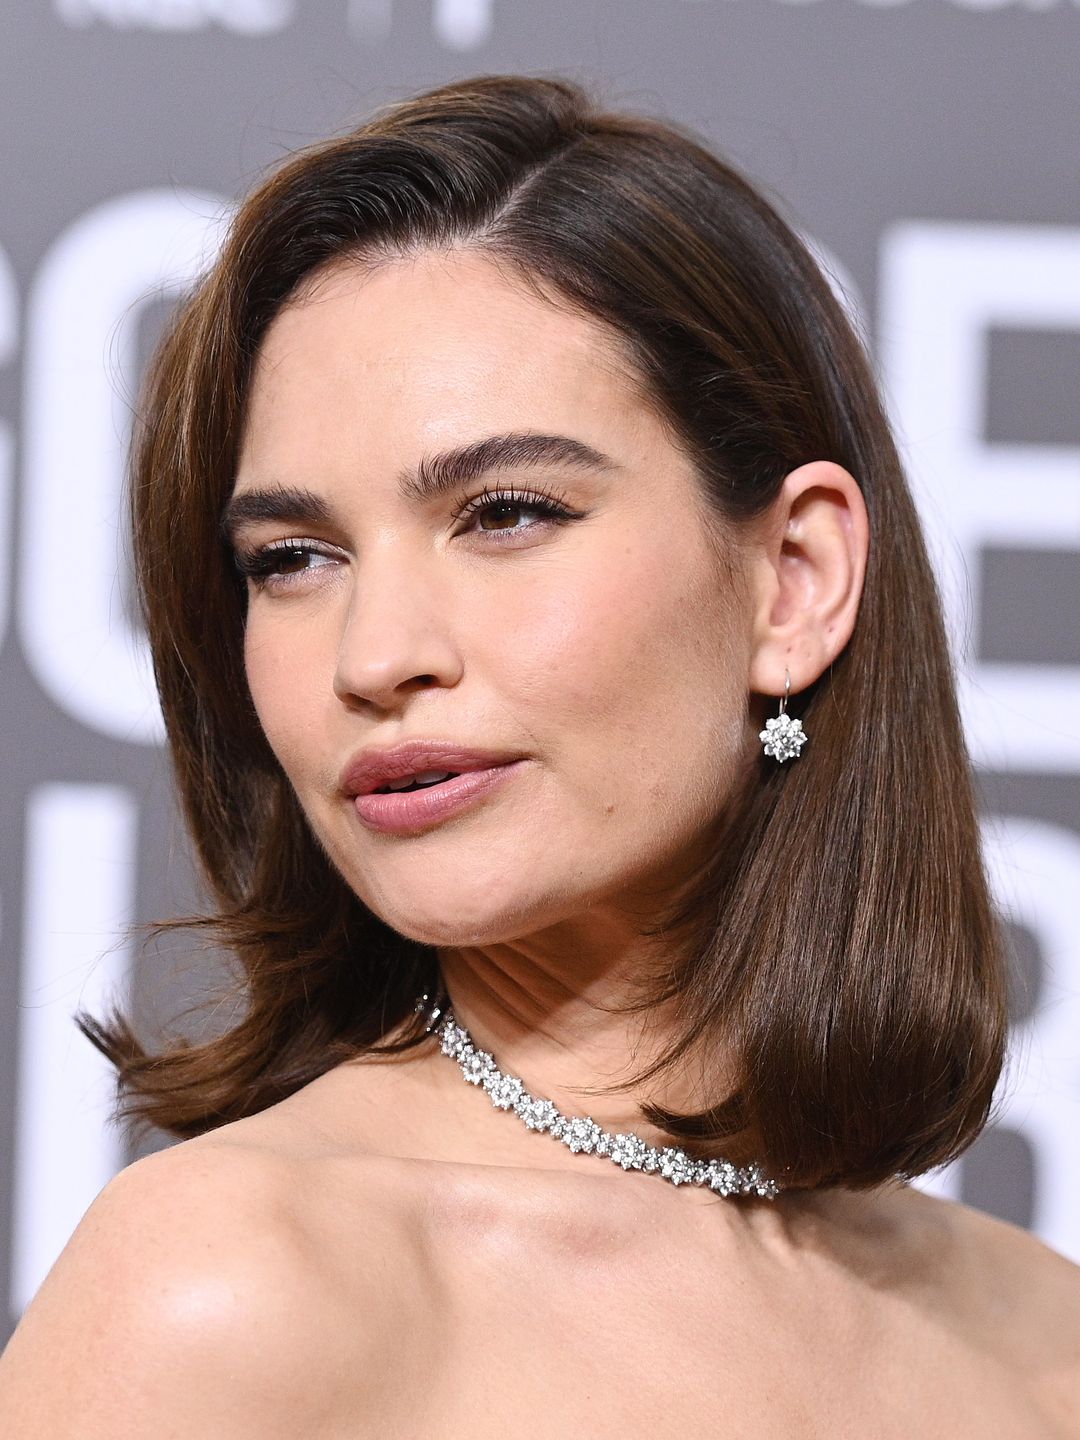 Lily James wearing her hair in a Hollywood bob at the Golden Globes 